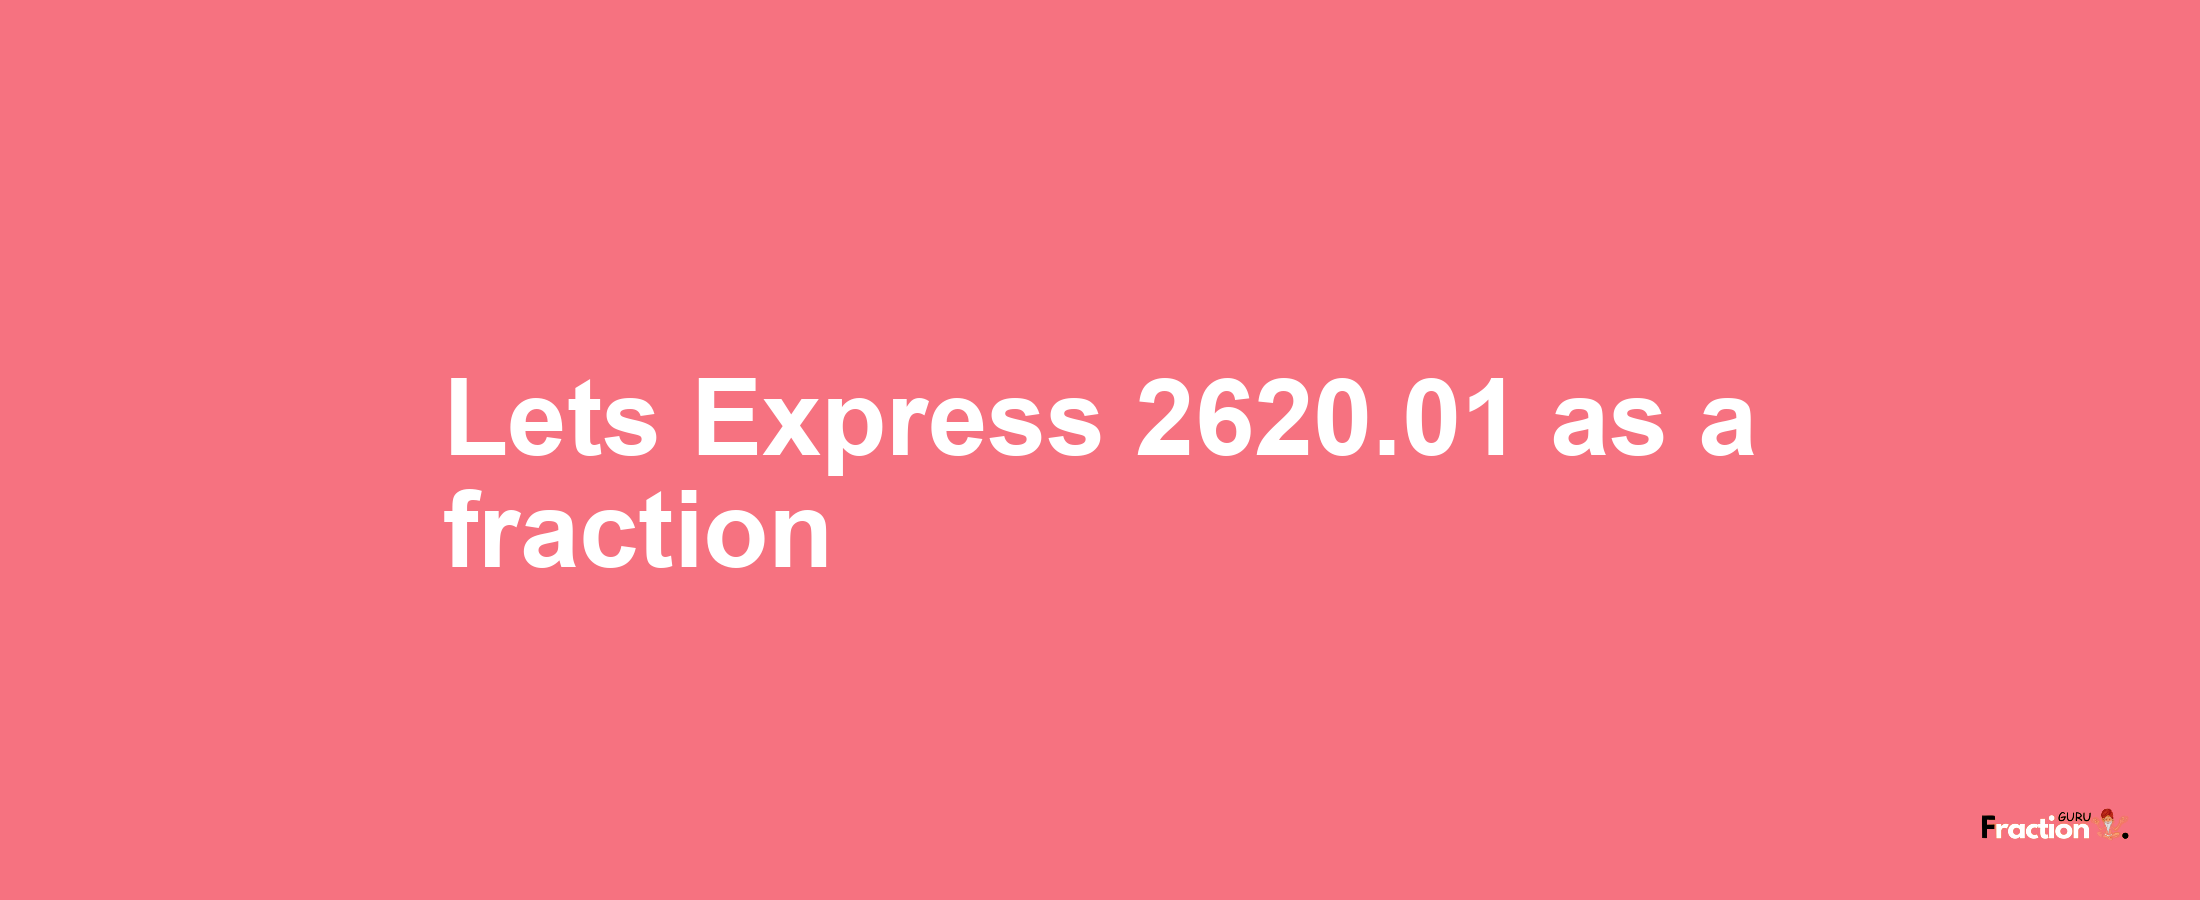 Lets Express 2620.01 as afraction